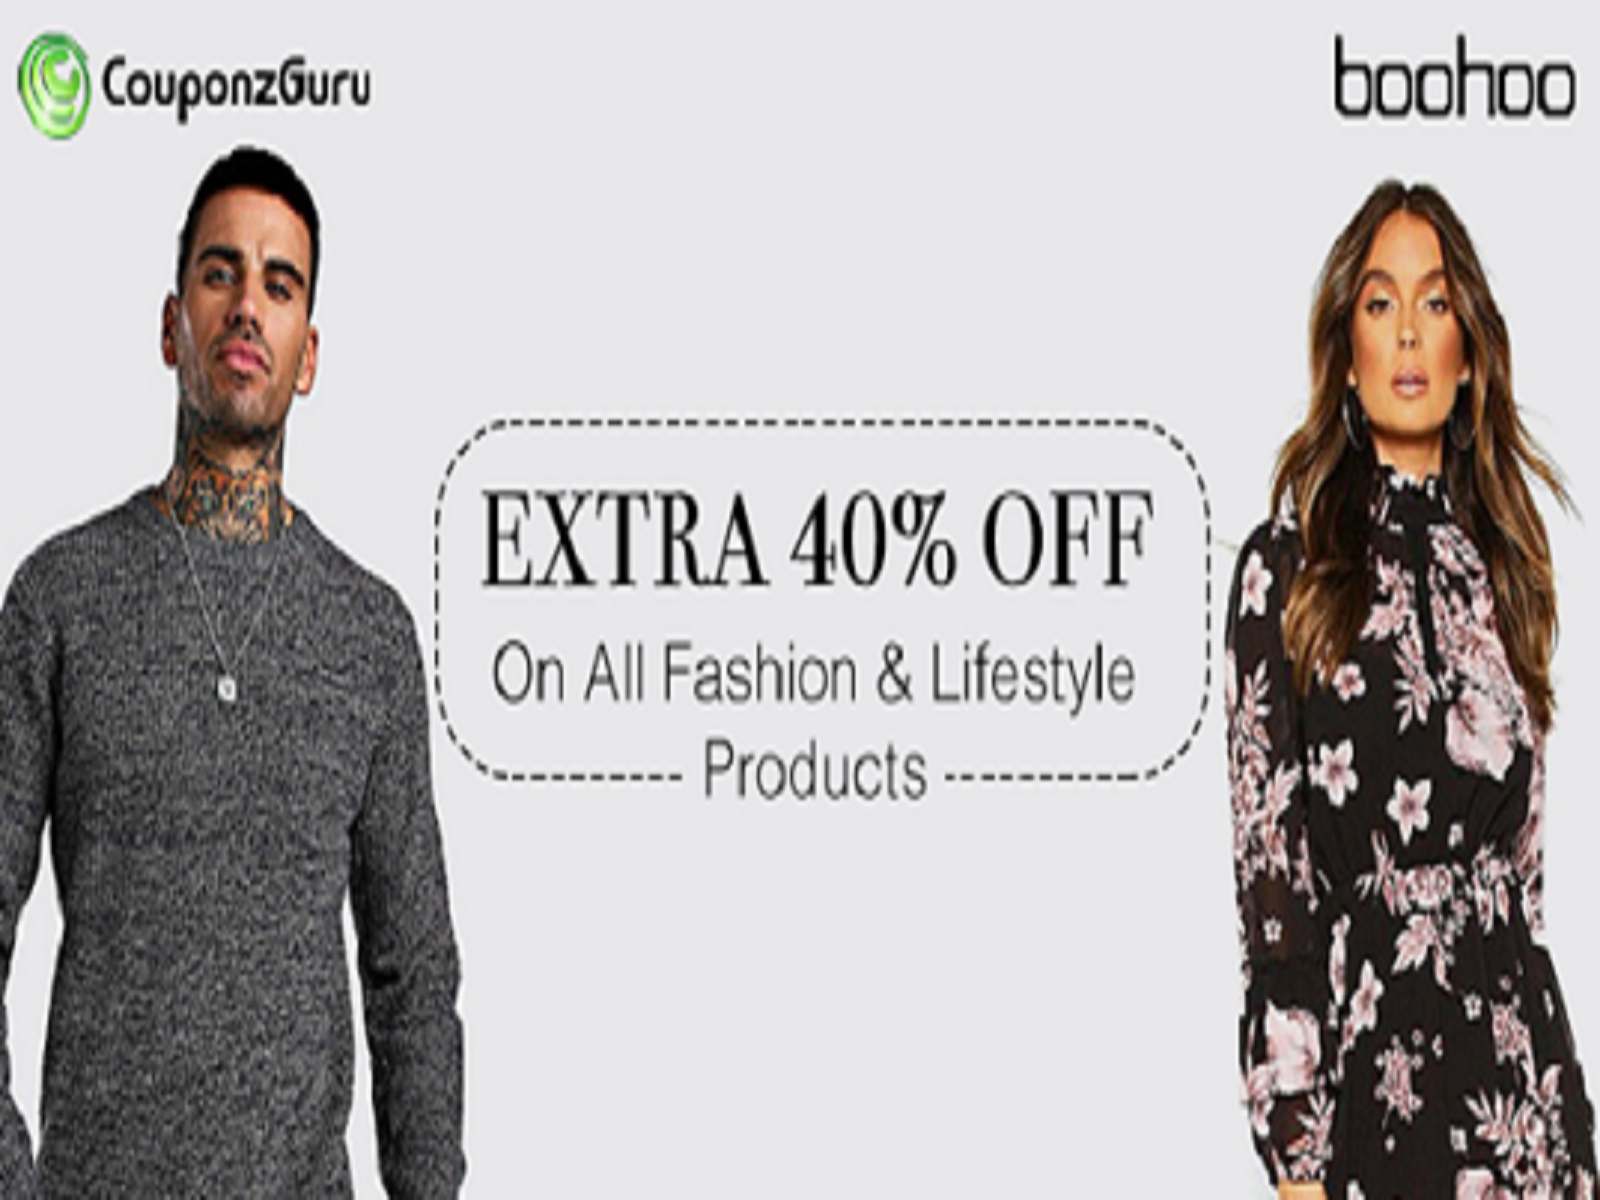 Boohoo Coupon Codes & Promotional Offers by joseph on Dribbble